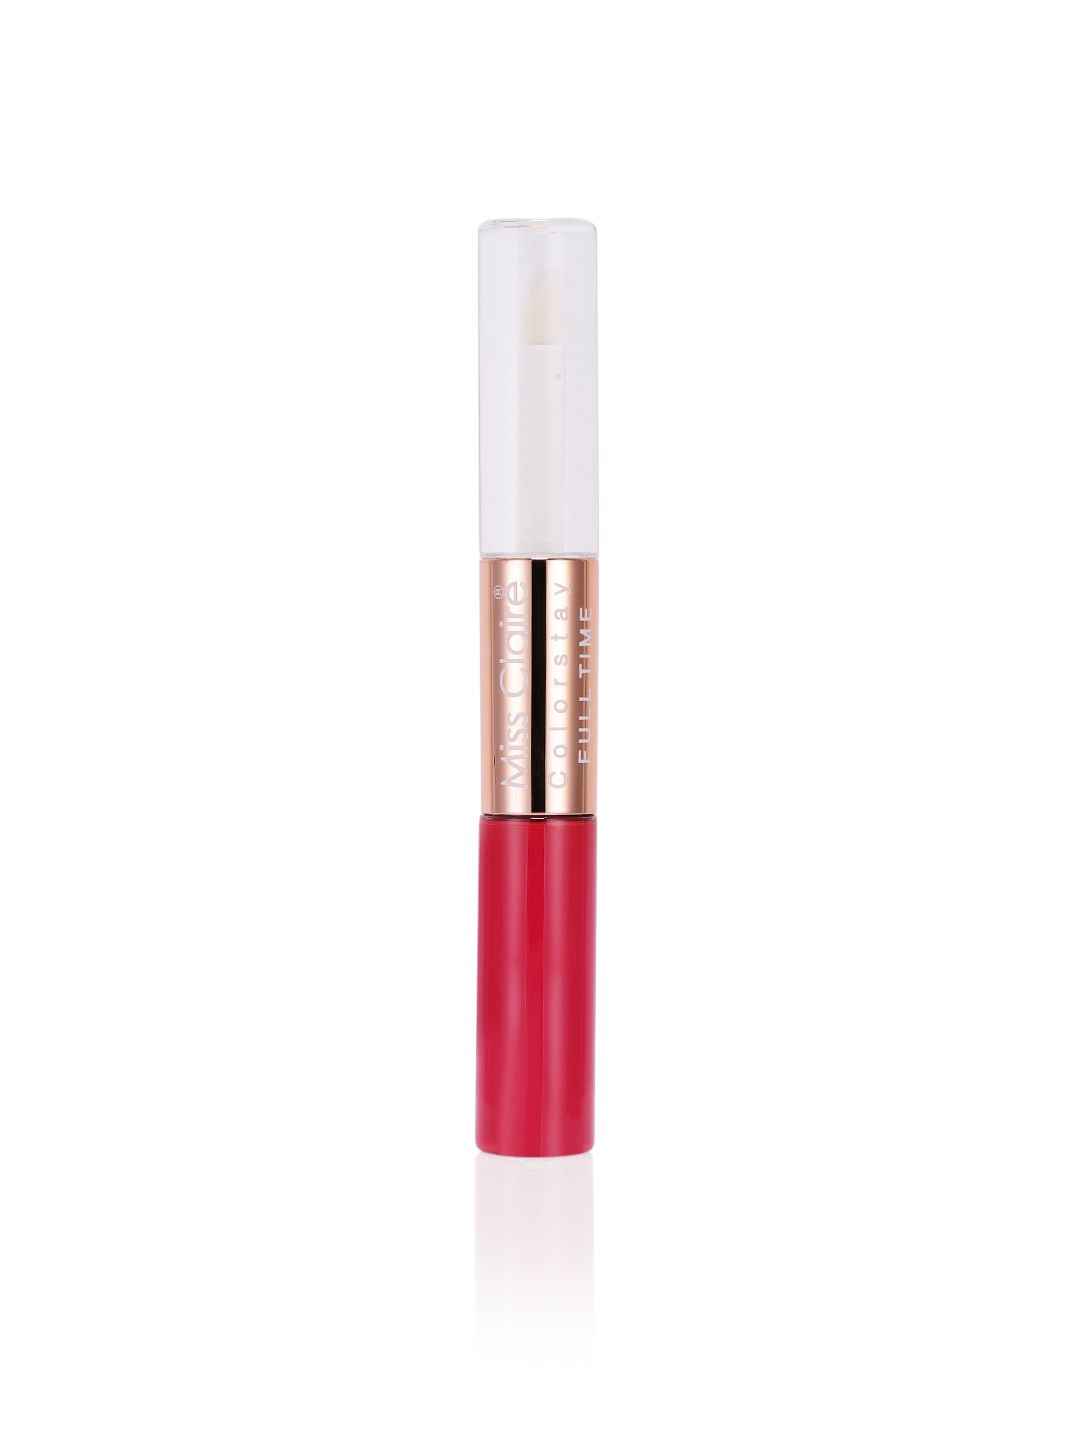 Miss Claire 6 Colorstay Full Time Lipcolor Price in India